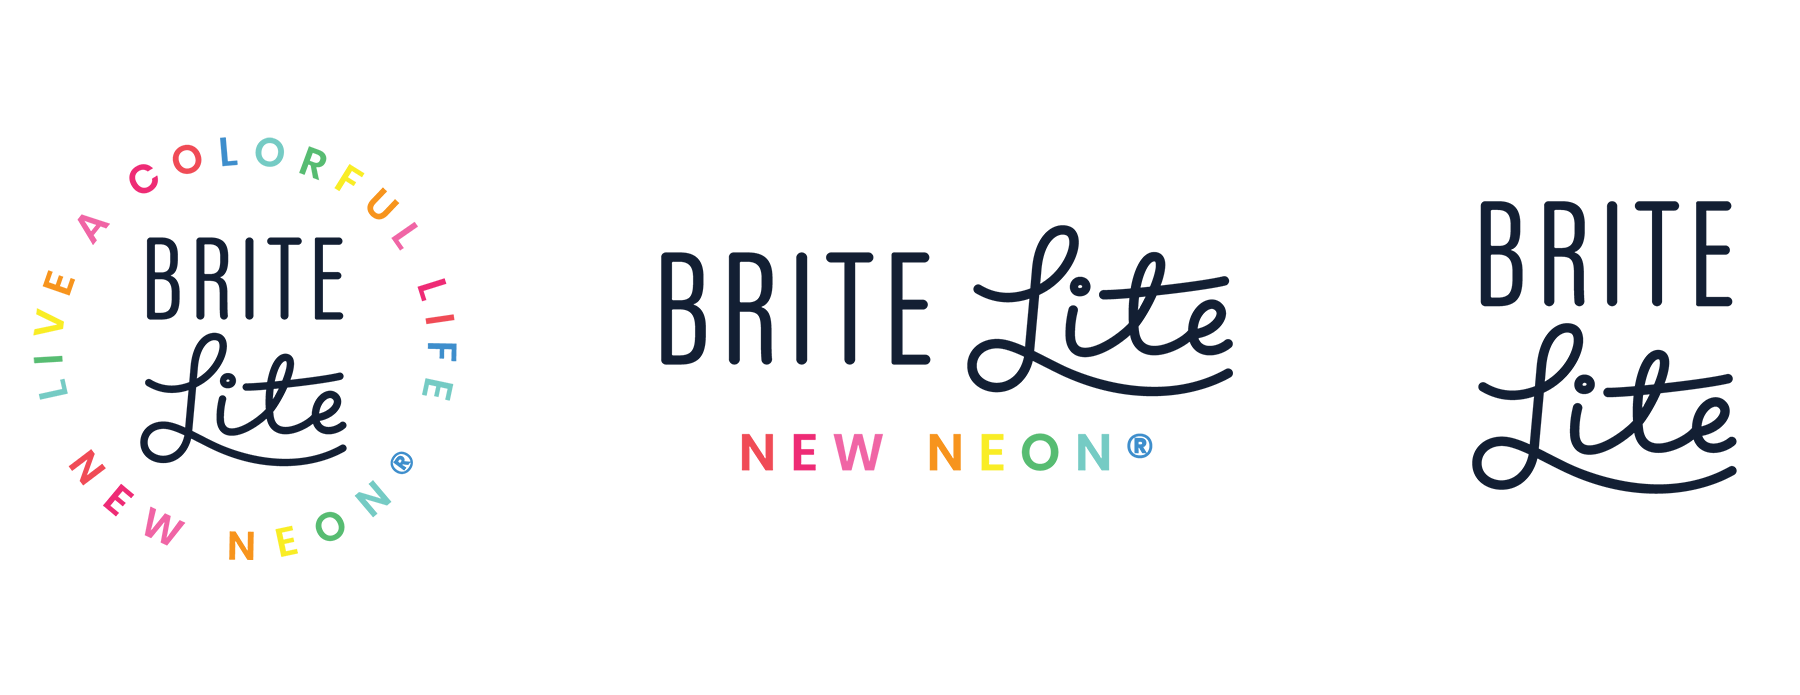 Brite Lite logos variations, featuring circular logo lockup with their tagline "Live a colorful life, New Neon", alongside their horizontal and stacked logos.